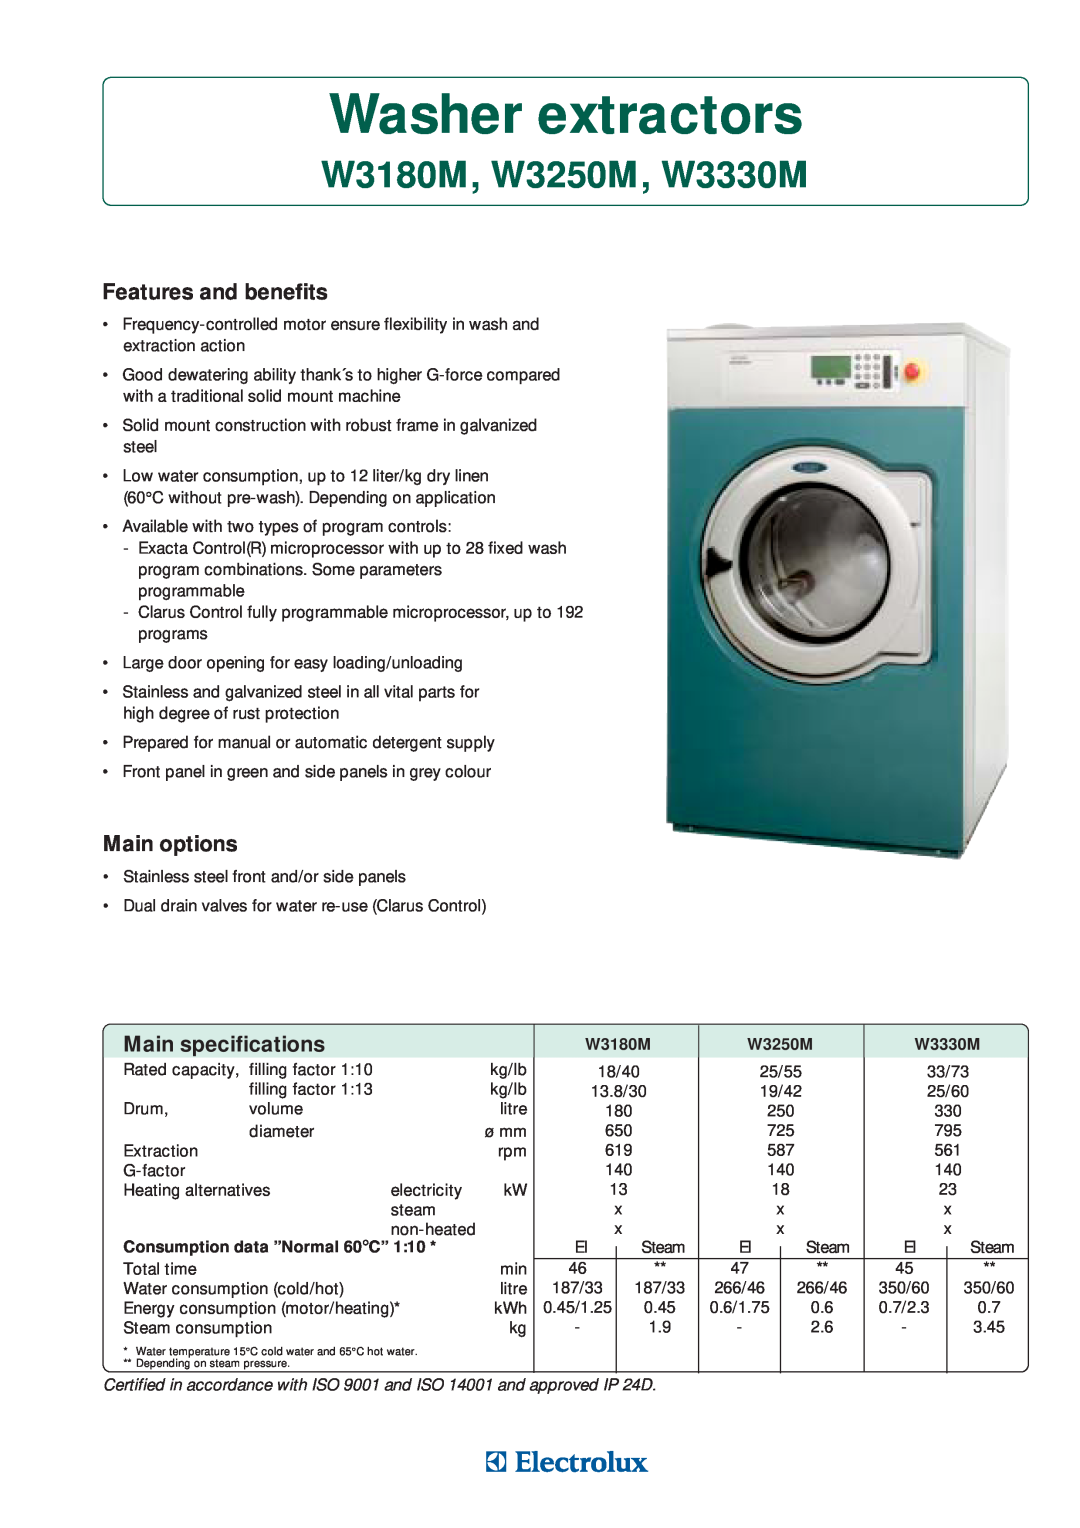 Electrolux specifications Washer extractors, W3180M, W3250M, W3330M, Features and benefits, Main options 